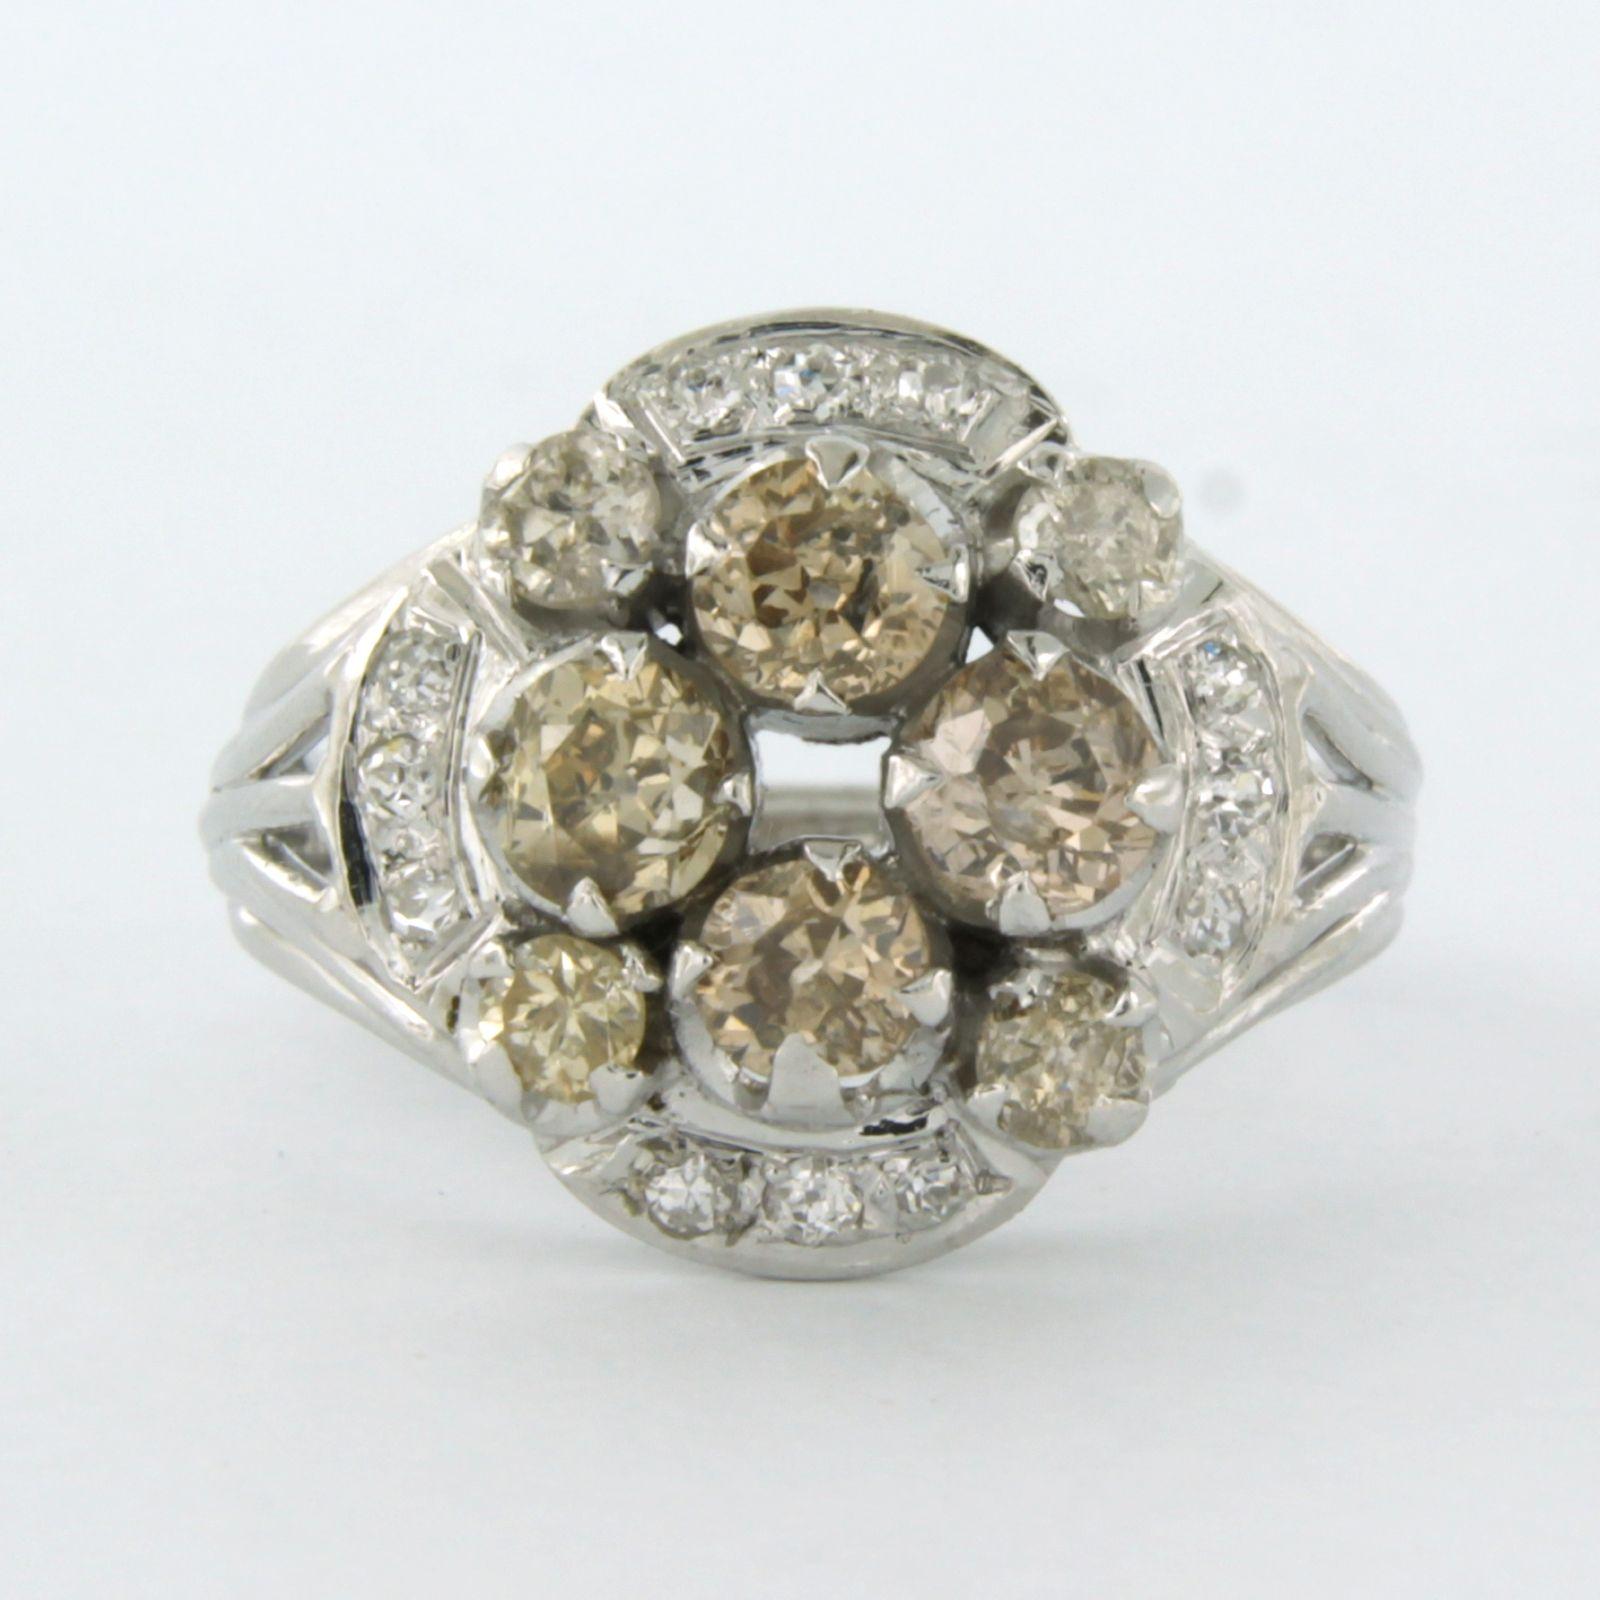 18k white gold ring with old mine cut and single cut diamond up to. 2.40ct – Champagne, K/L, F/G – Pique, VS/SI - ring size U.S. 8.75 – EU. 18.75(59)

Detailed description

the top of the ring is 1.6 cm wide and 8.6 mm high

Ring size US 8.75 – EU.